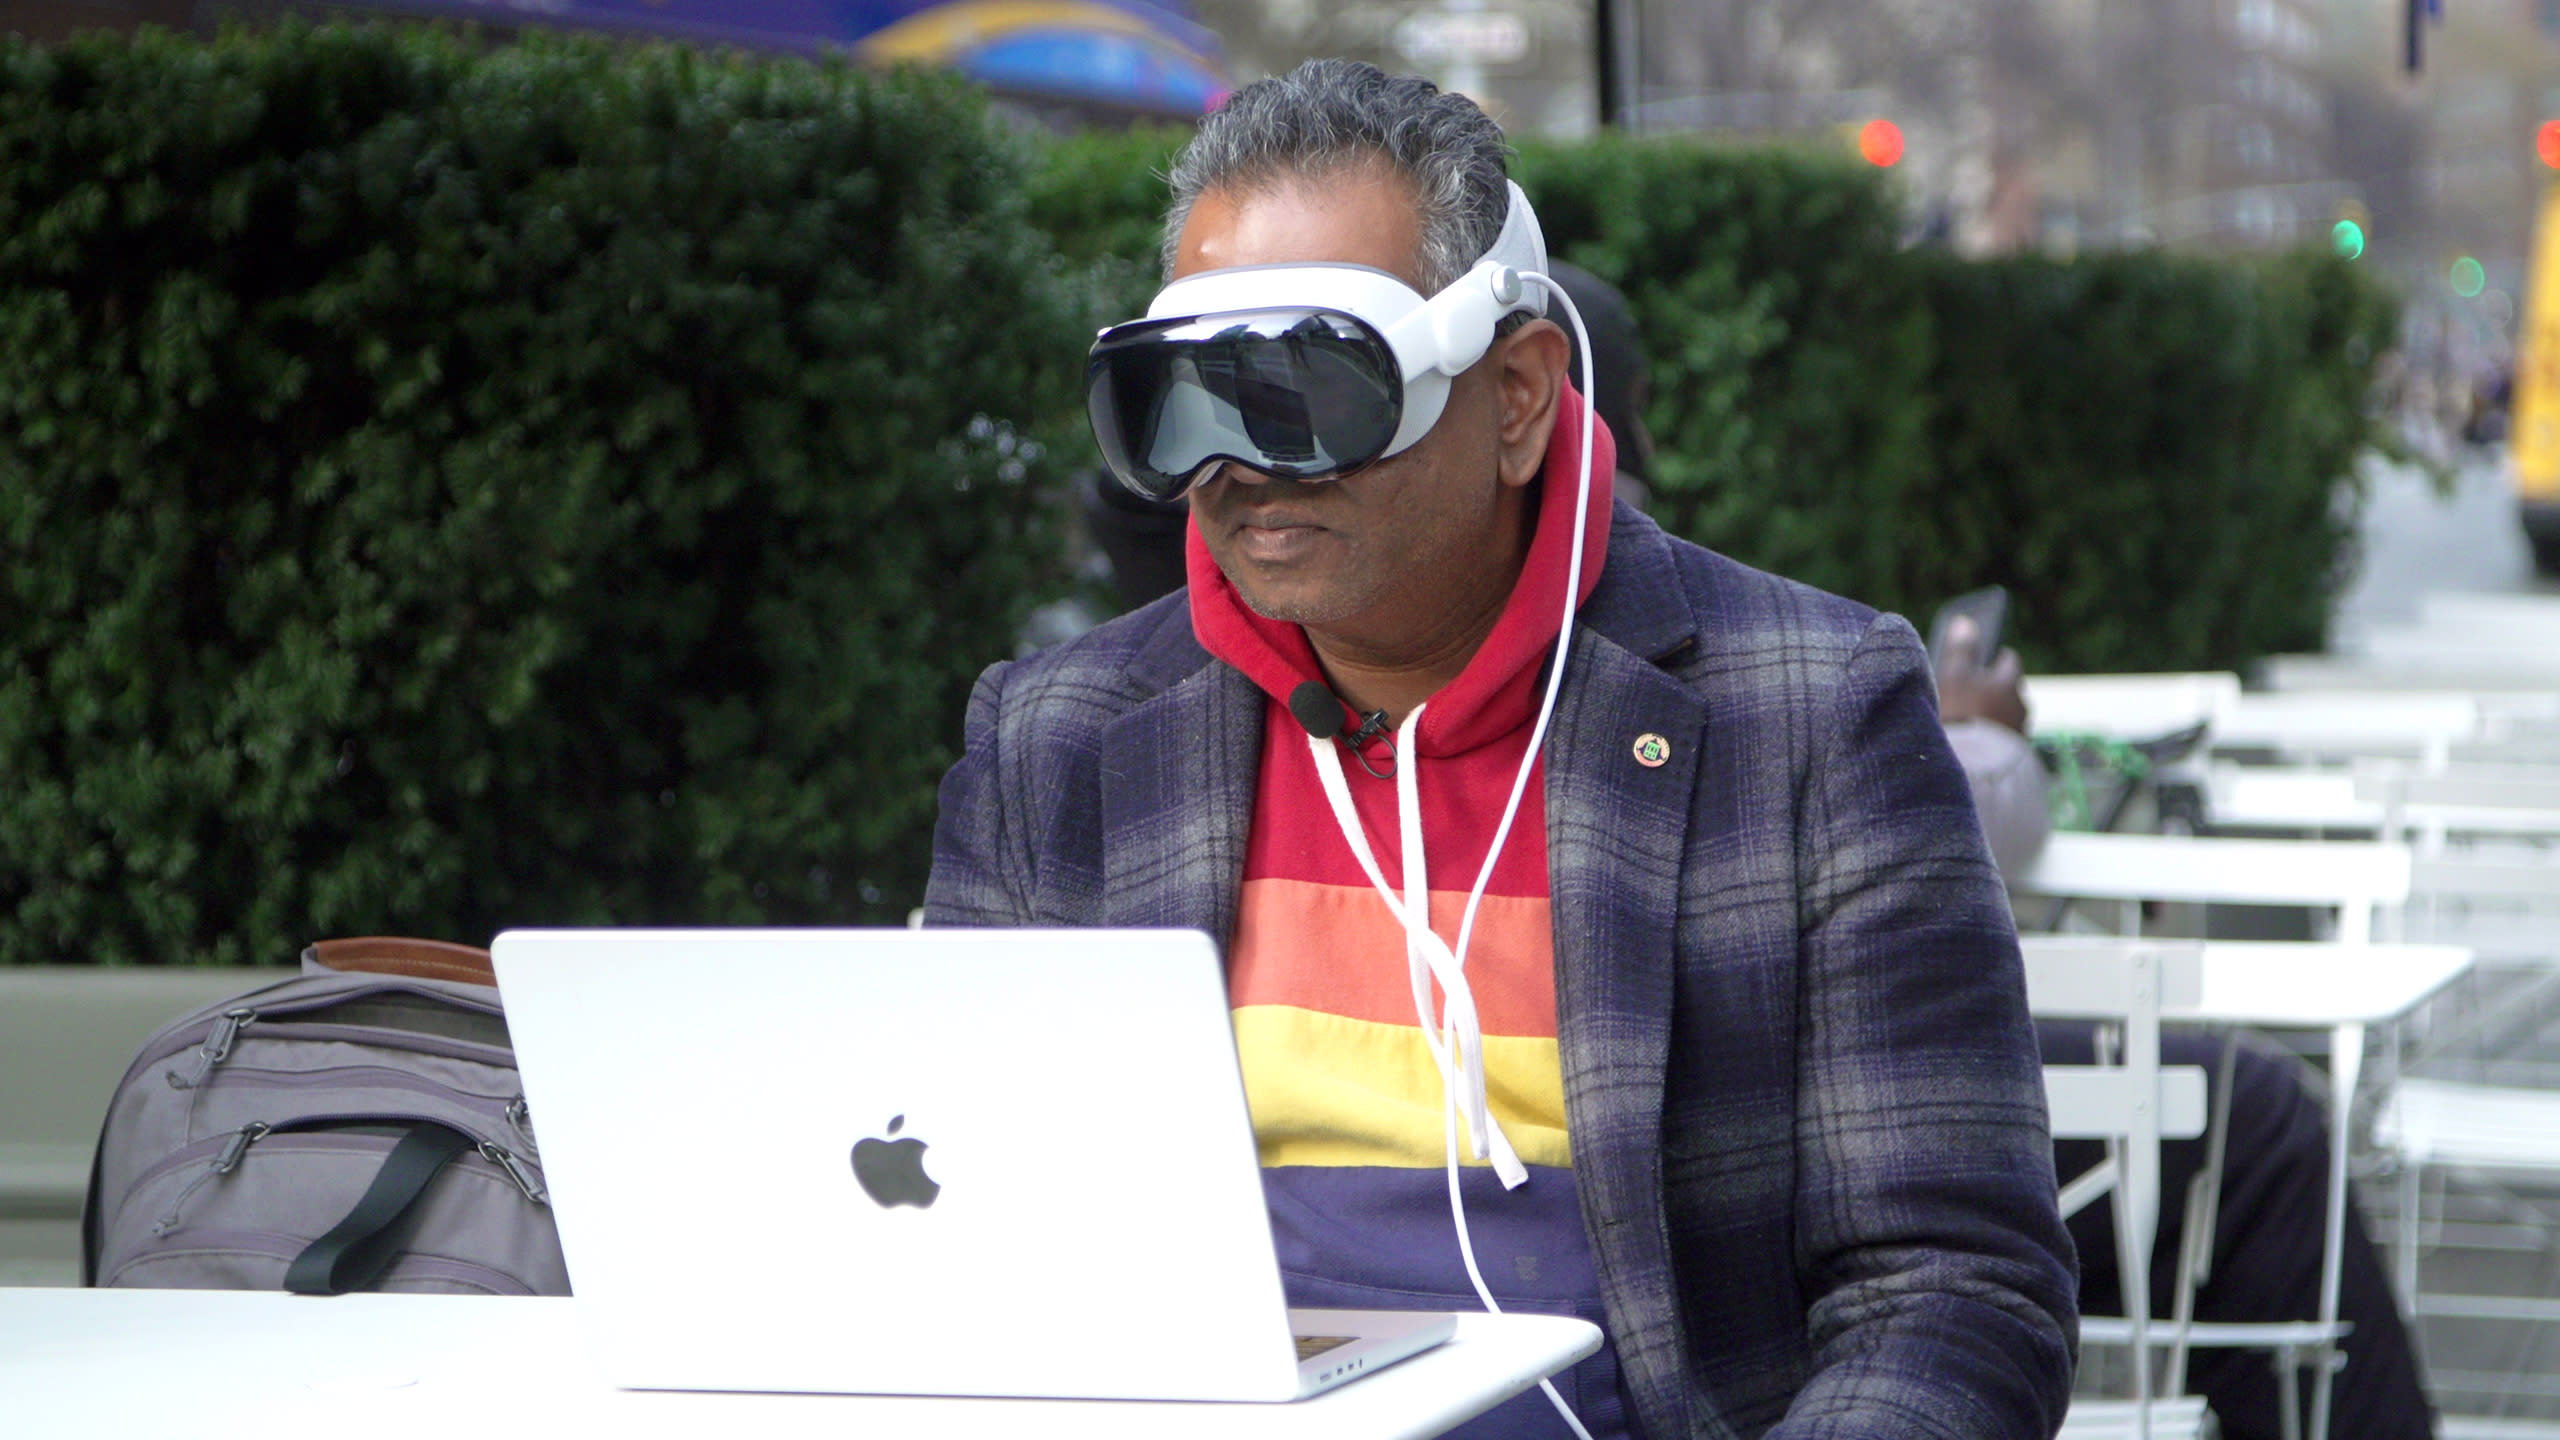 Using the Vision Pro with a MacBook in New York City